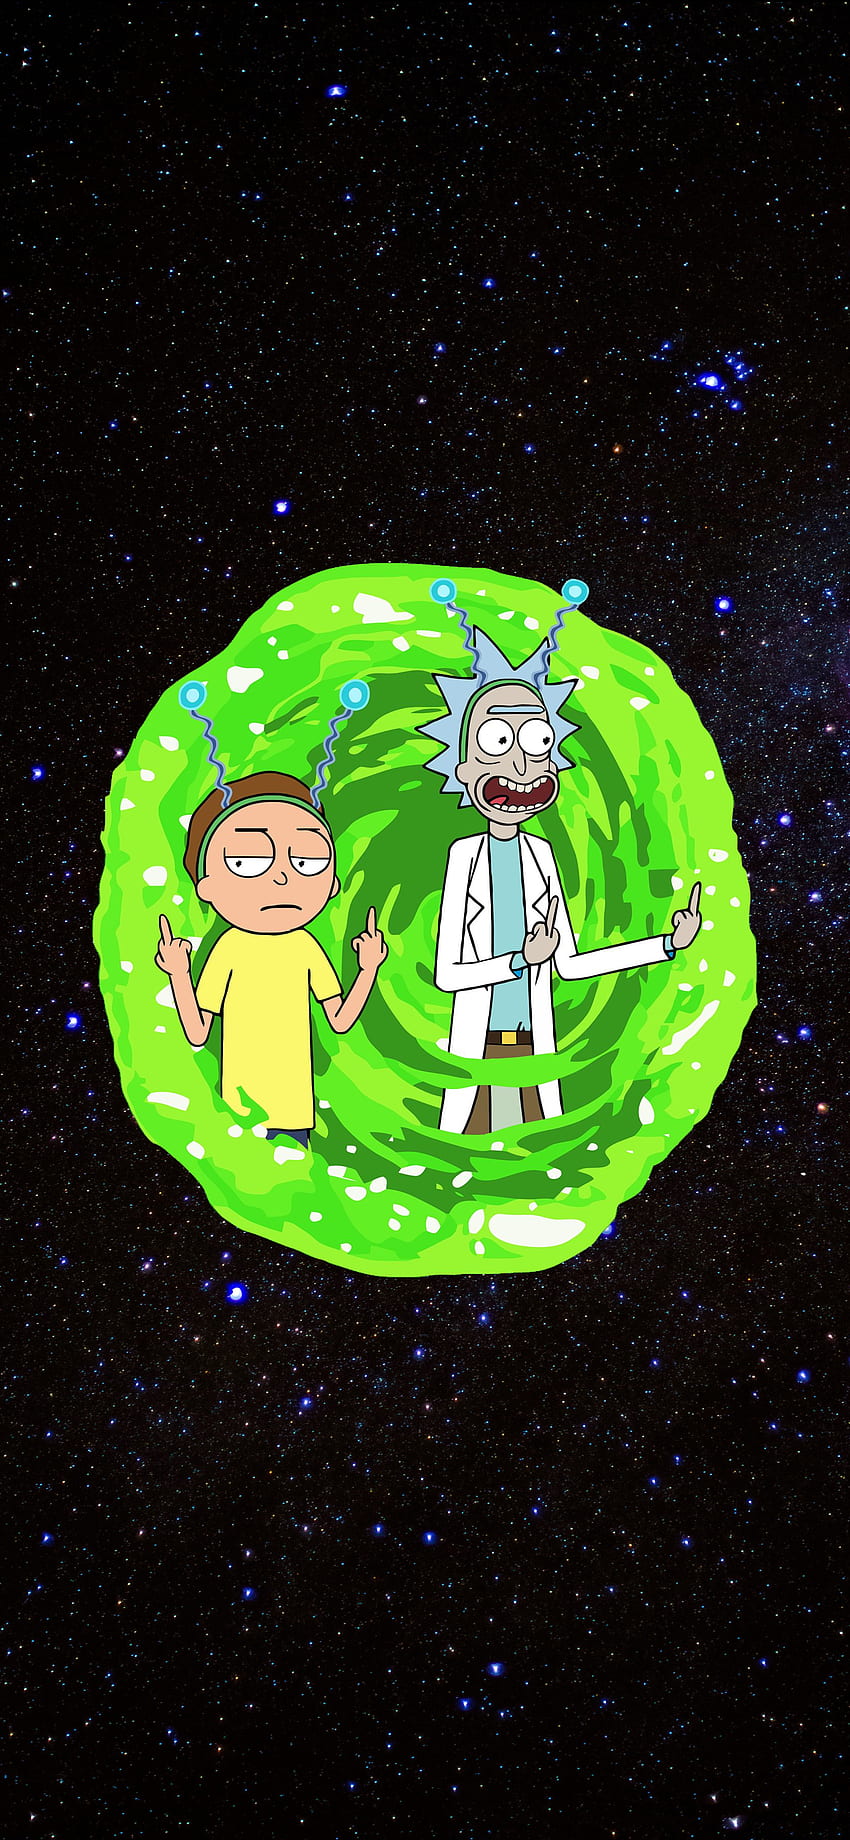 HEROSCREEN: Rick and Morty phone collection. Rick and morty drawing, iPhone rick and morty, Rick and morty poster, Rick and Morty Cool HD phone wallpaper